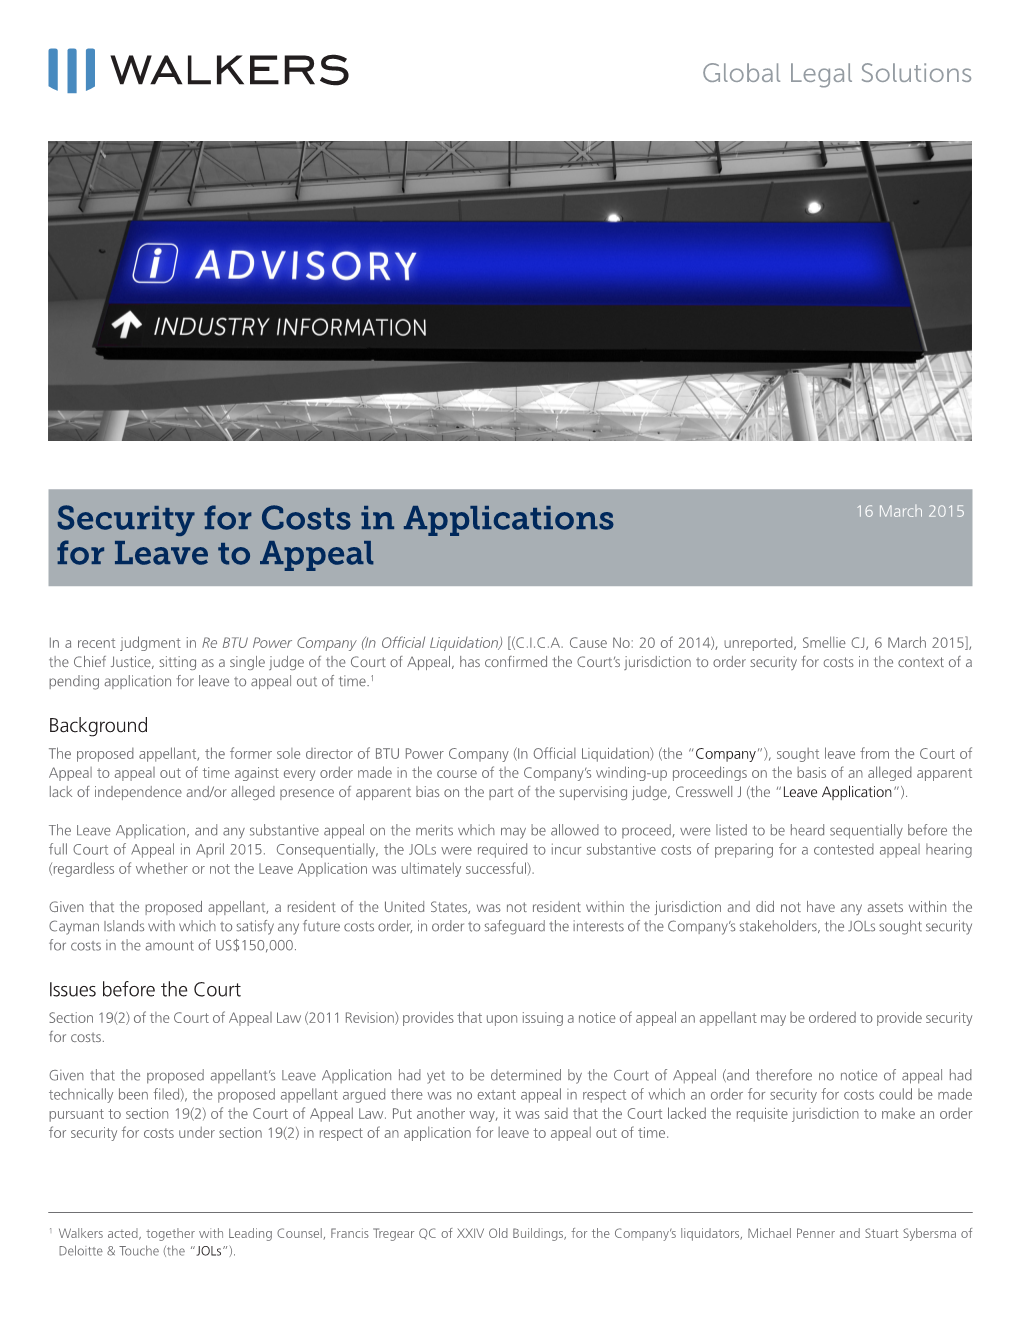 Security for Costs in Applications for Leave to Appeal